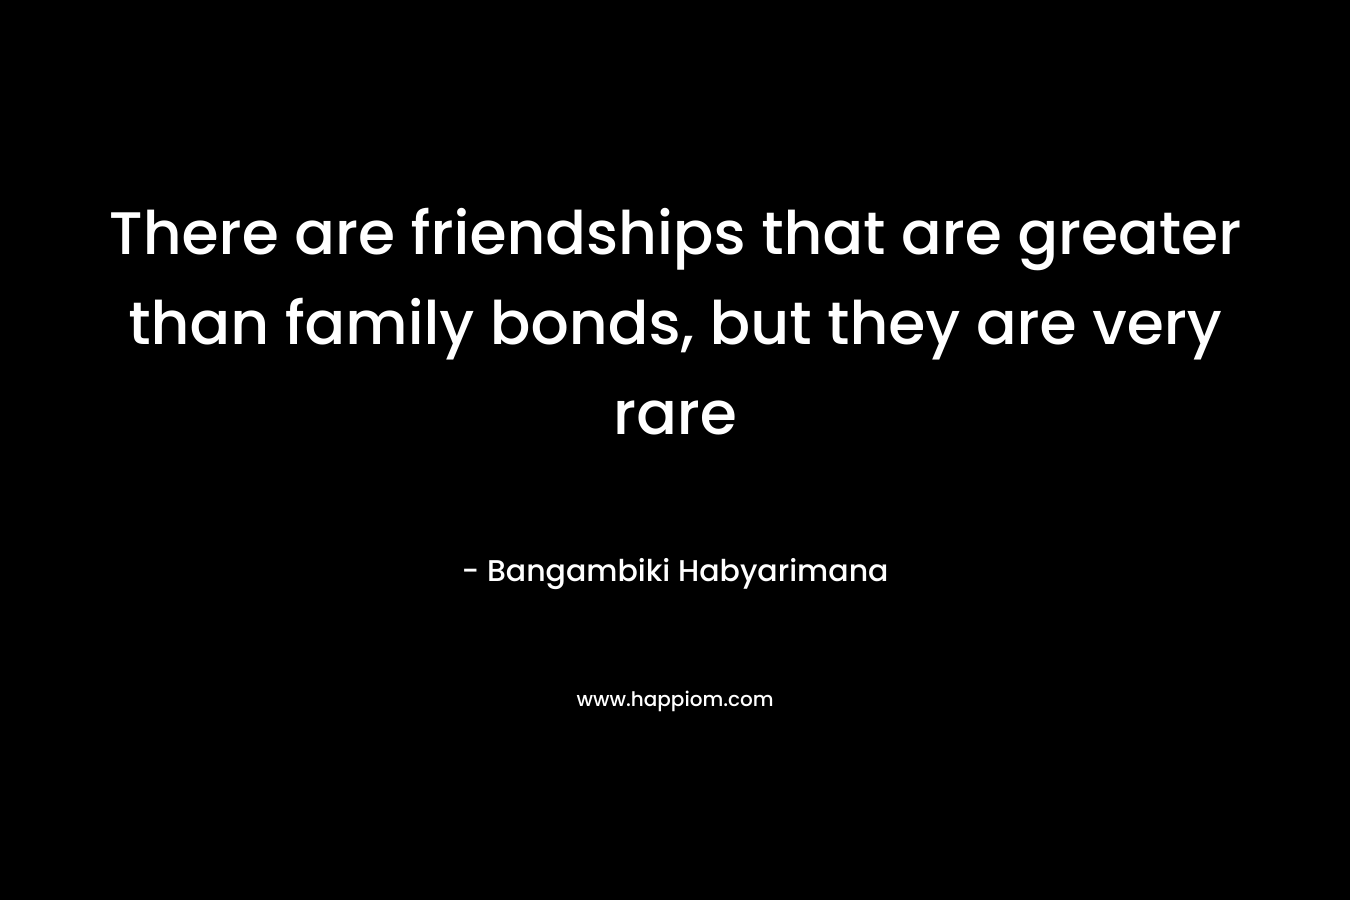 There are friendships that are greater than family bonds, but they are very rare – Bangambiki Habyarimana